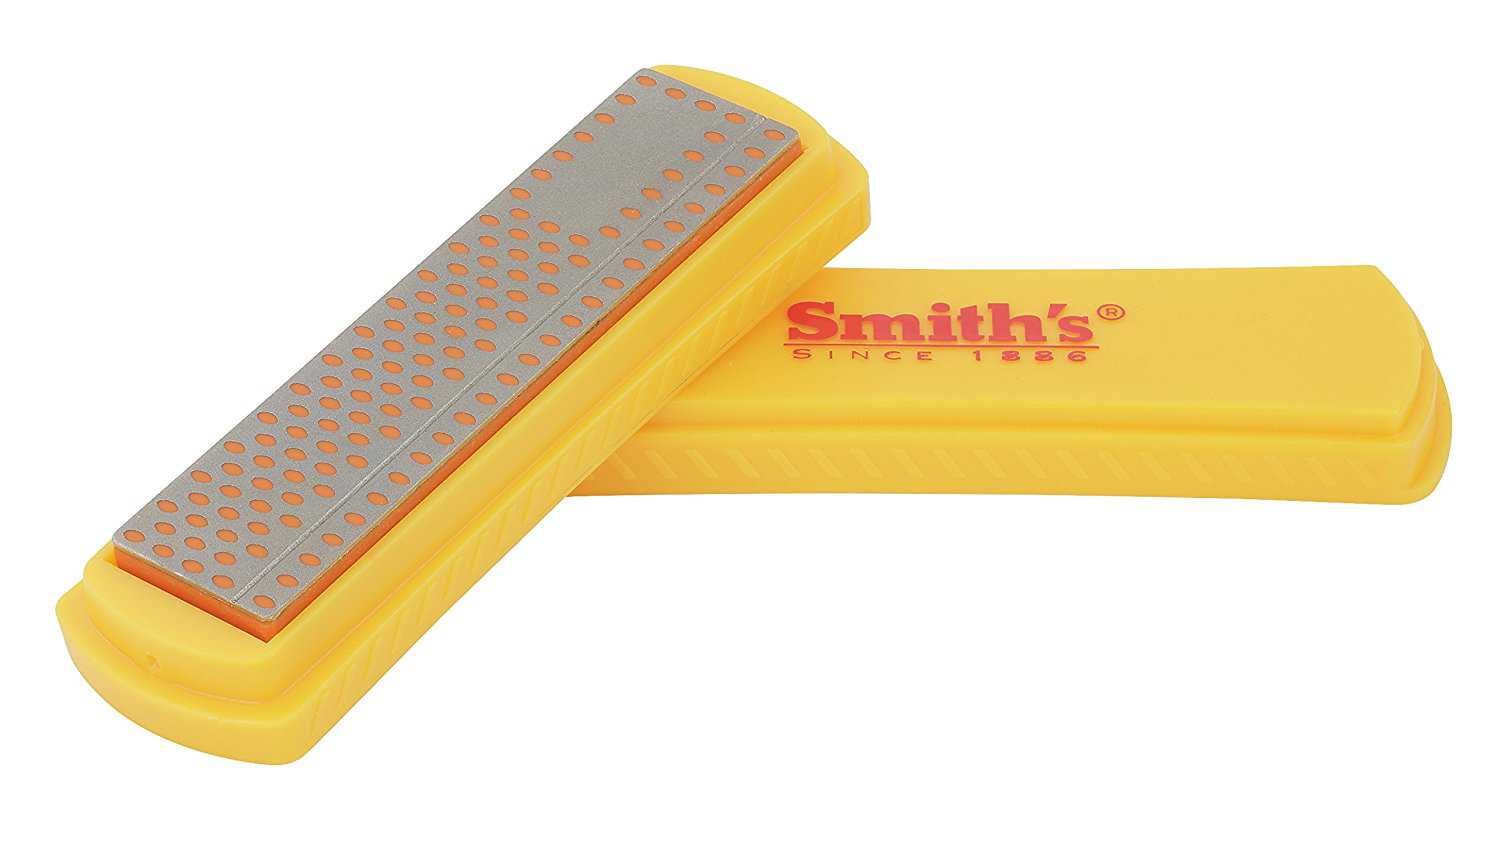 Smith's 50447 4-Inch Diamond Sharpening StoneMicro-Tool Sharpening Pad for tips of your knife blade and small cutting tools By Smiths